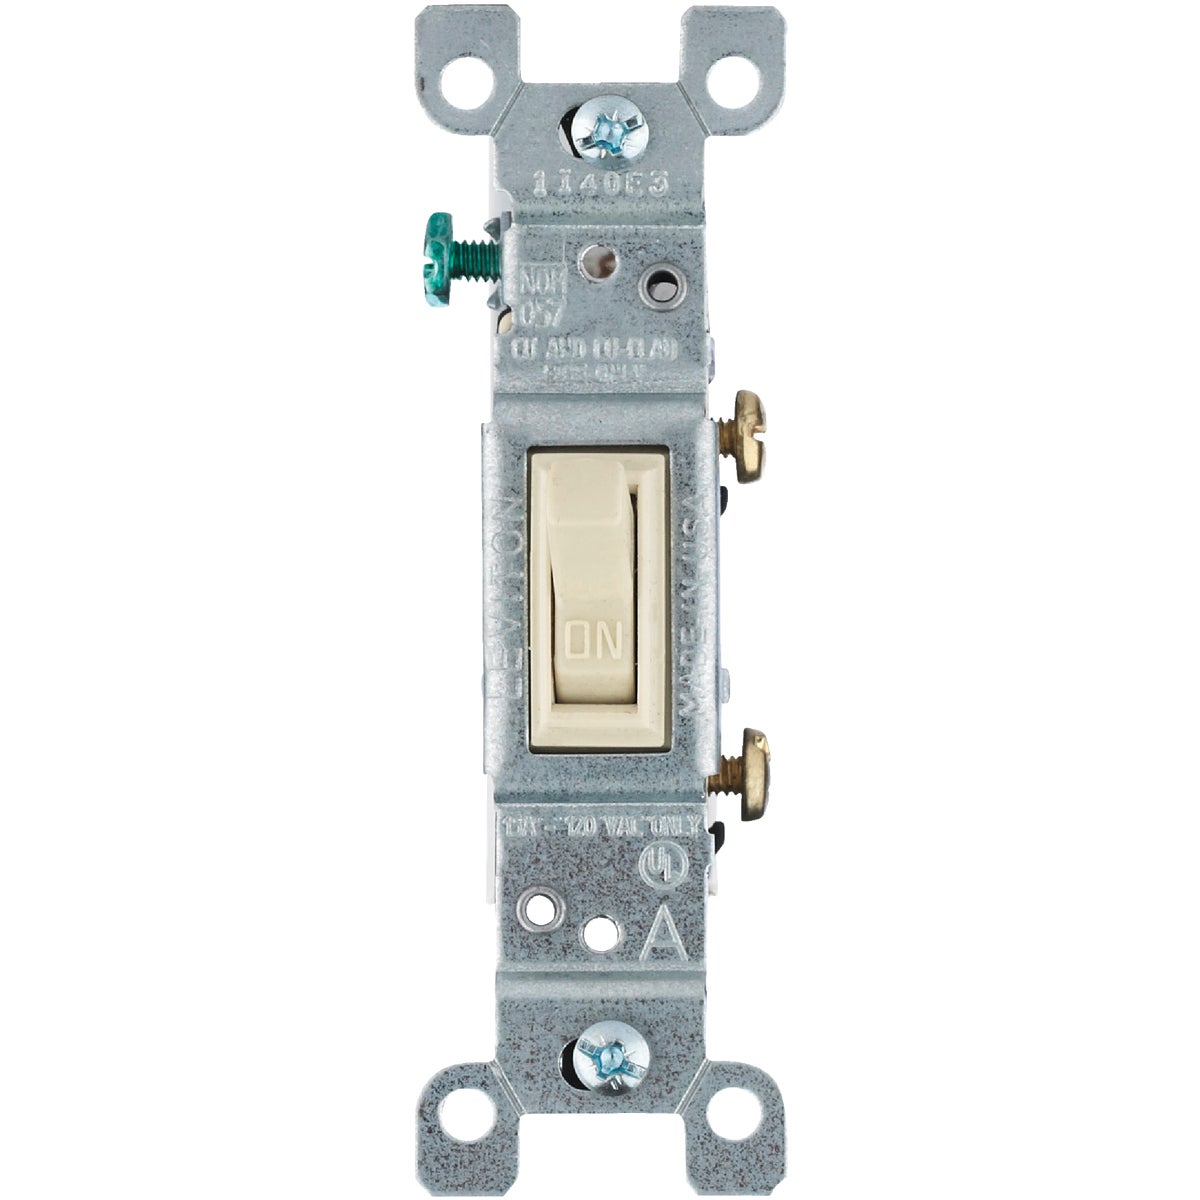 Item 505587, Quiet single pole switch ideal for controlling one fixture from a single 